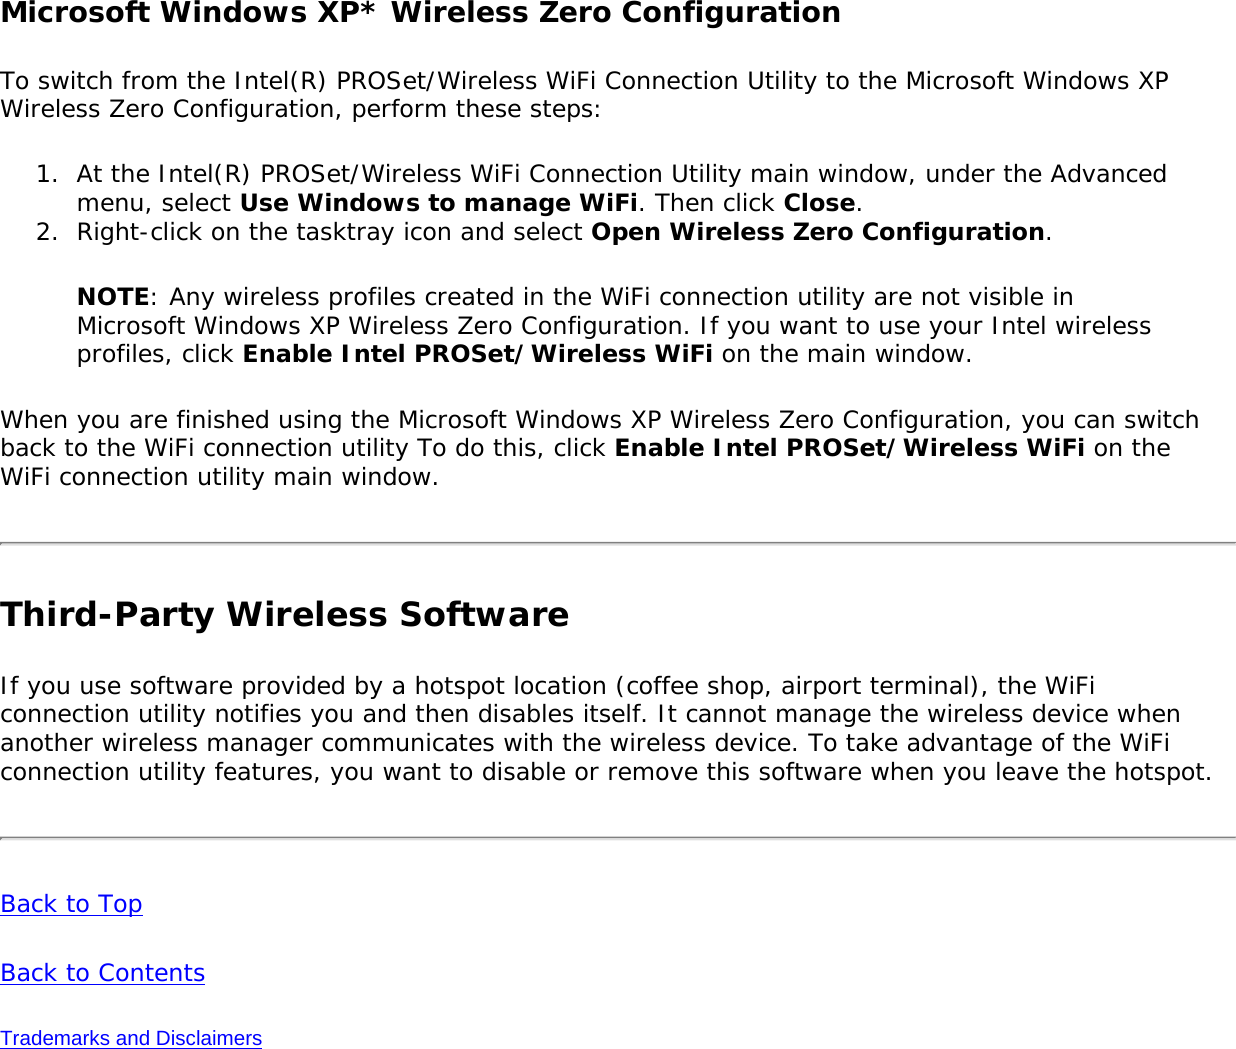 Microsoft Windows XP* Wireless Zero Configuration To switch from the Intel(R) PROSet/Wireless WiFi Connection Utility to the Microsoft Windows XP Wireless Zero Configuration, perform these steps: 1.  At the Intel(R) PROSet/Wireless WiFi Connection Utility main window, under the Advanced menu, select Use Windows to manage WiFi. Then click Close. 2.  Right-click on the tasktray icon and select Open Wireless Zero Configuration.NOTE: Any wireless profiles created in the WiFi connection utility are not visible in Microsoft Windows XP Wireless Zero Configuration. If you want to use your Intel wireless profiles, click Enable Intel PROSet/Wireless WiFi on the main window.When you are finished using the Microsoft Windows XP Wireless Zero Configuration, you can switch back to the WiFi connection utility To do this, click Enable Intel PROSet/Wireless WiFi on the WiFi connection utility main window. Third-Party Wireless SoftwareIf you use software provided by a hotspot location (coffee shop, airport terminal), the WiFi connection utility notifies you and then disables itself. It cannot manage the wireless device when another wireless manager communicates with the wireless device. To take advantage of the WiFi connection utility features, you want to disable or remove this software when you leave the hotspot. Back to TopBack to ContentsTrademarks and Disclaimers